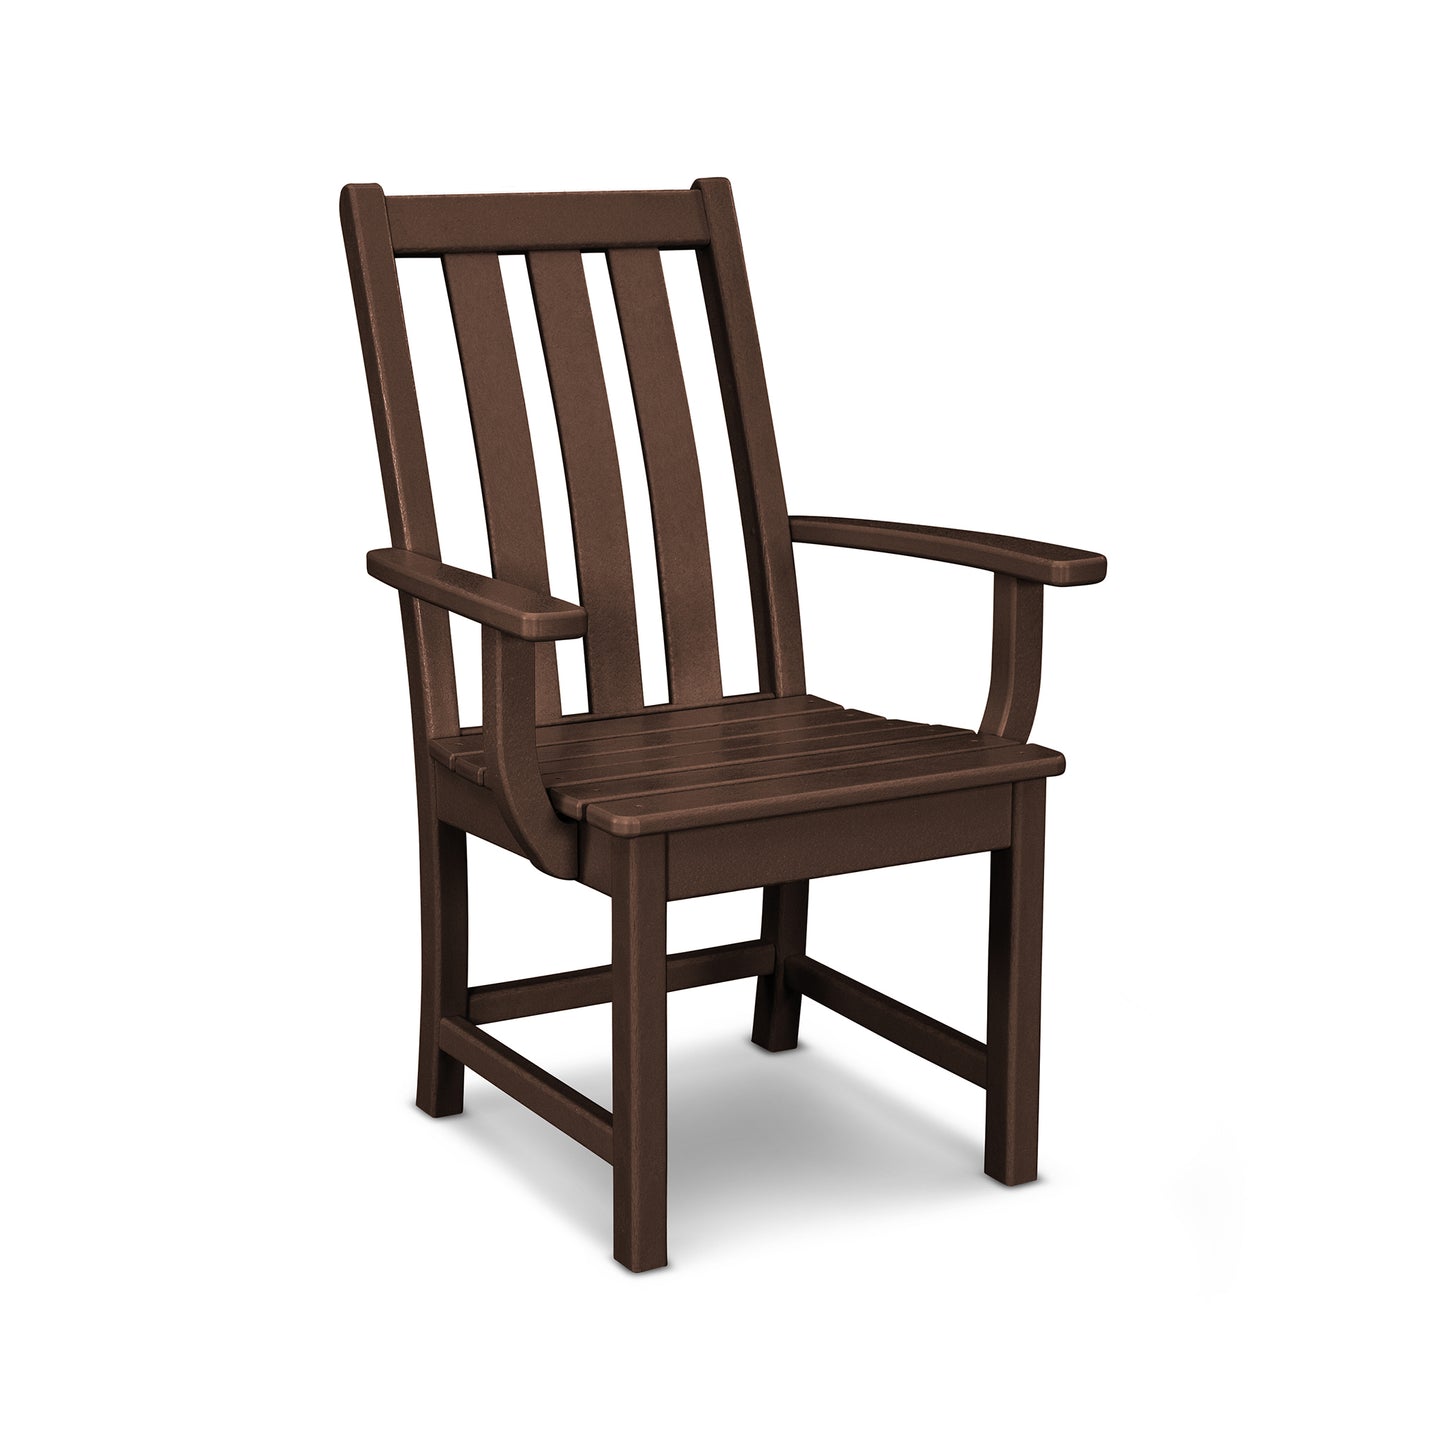 A brown POLYWOOD Vineyard Dining Arm Chair made of plastic, featuring a tall back with vertical slats and wide armrests, isolated on a white background.